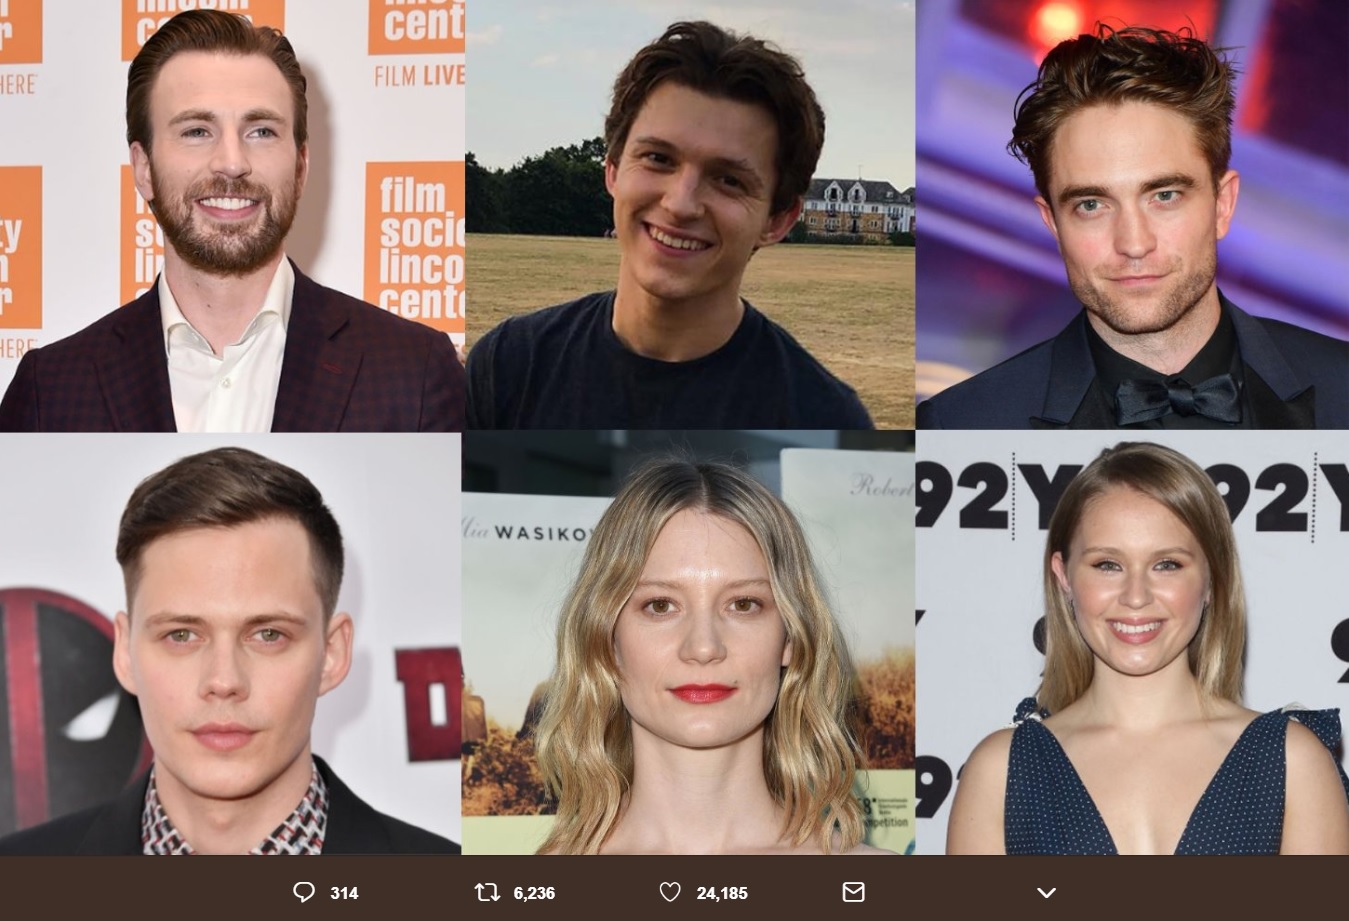 『The Devil All The Time』の豪華キャスト達（画像は『See What’s Next　2019年1月16日付Twitter「Chris Evans, Tom Holland, Robert Pattinson, Bill Skarsgard, Mia Wasikowska, and Eliza Scanlen will star in “The Devil All The Time,” a midwestern gothic involving a serial killer couple, a faith-testing preacher, and a corrupt local sheriff in a story told across two decades」』のスクリーンショット）